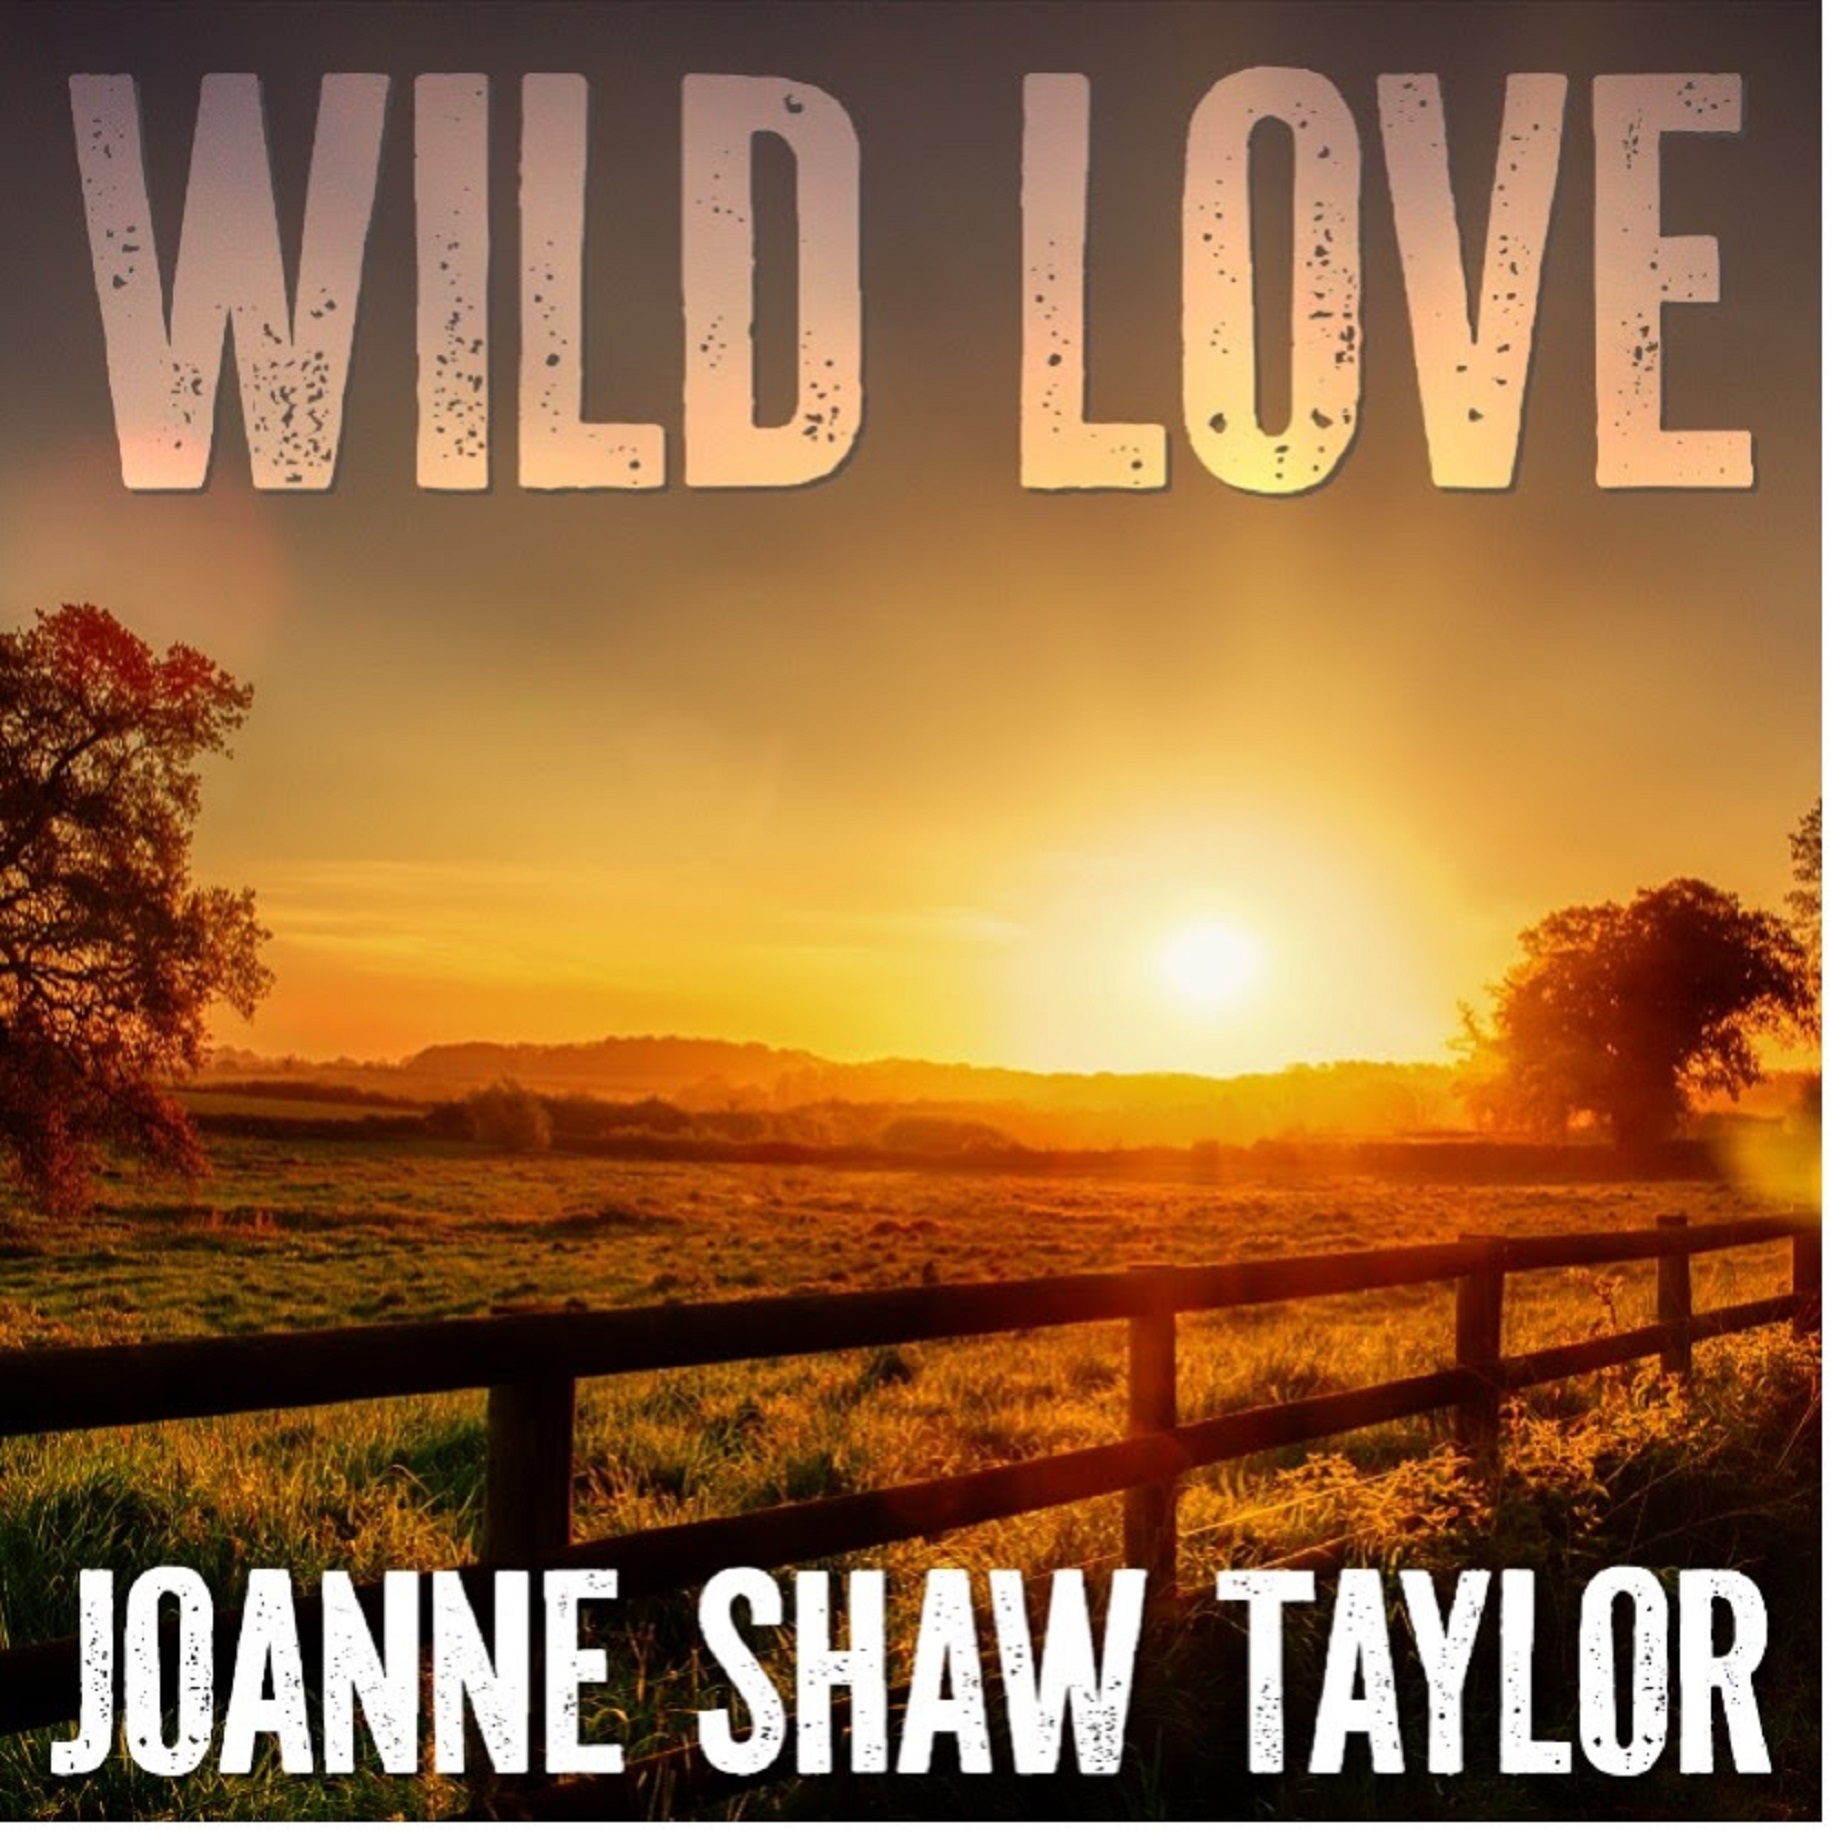 British blues-rock virtuoso Joanne Shaw Taylor adds a sultry twist to her catalog with "Wild Love"